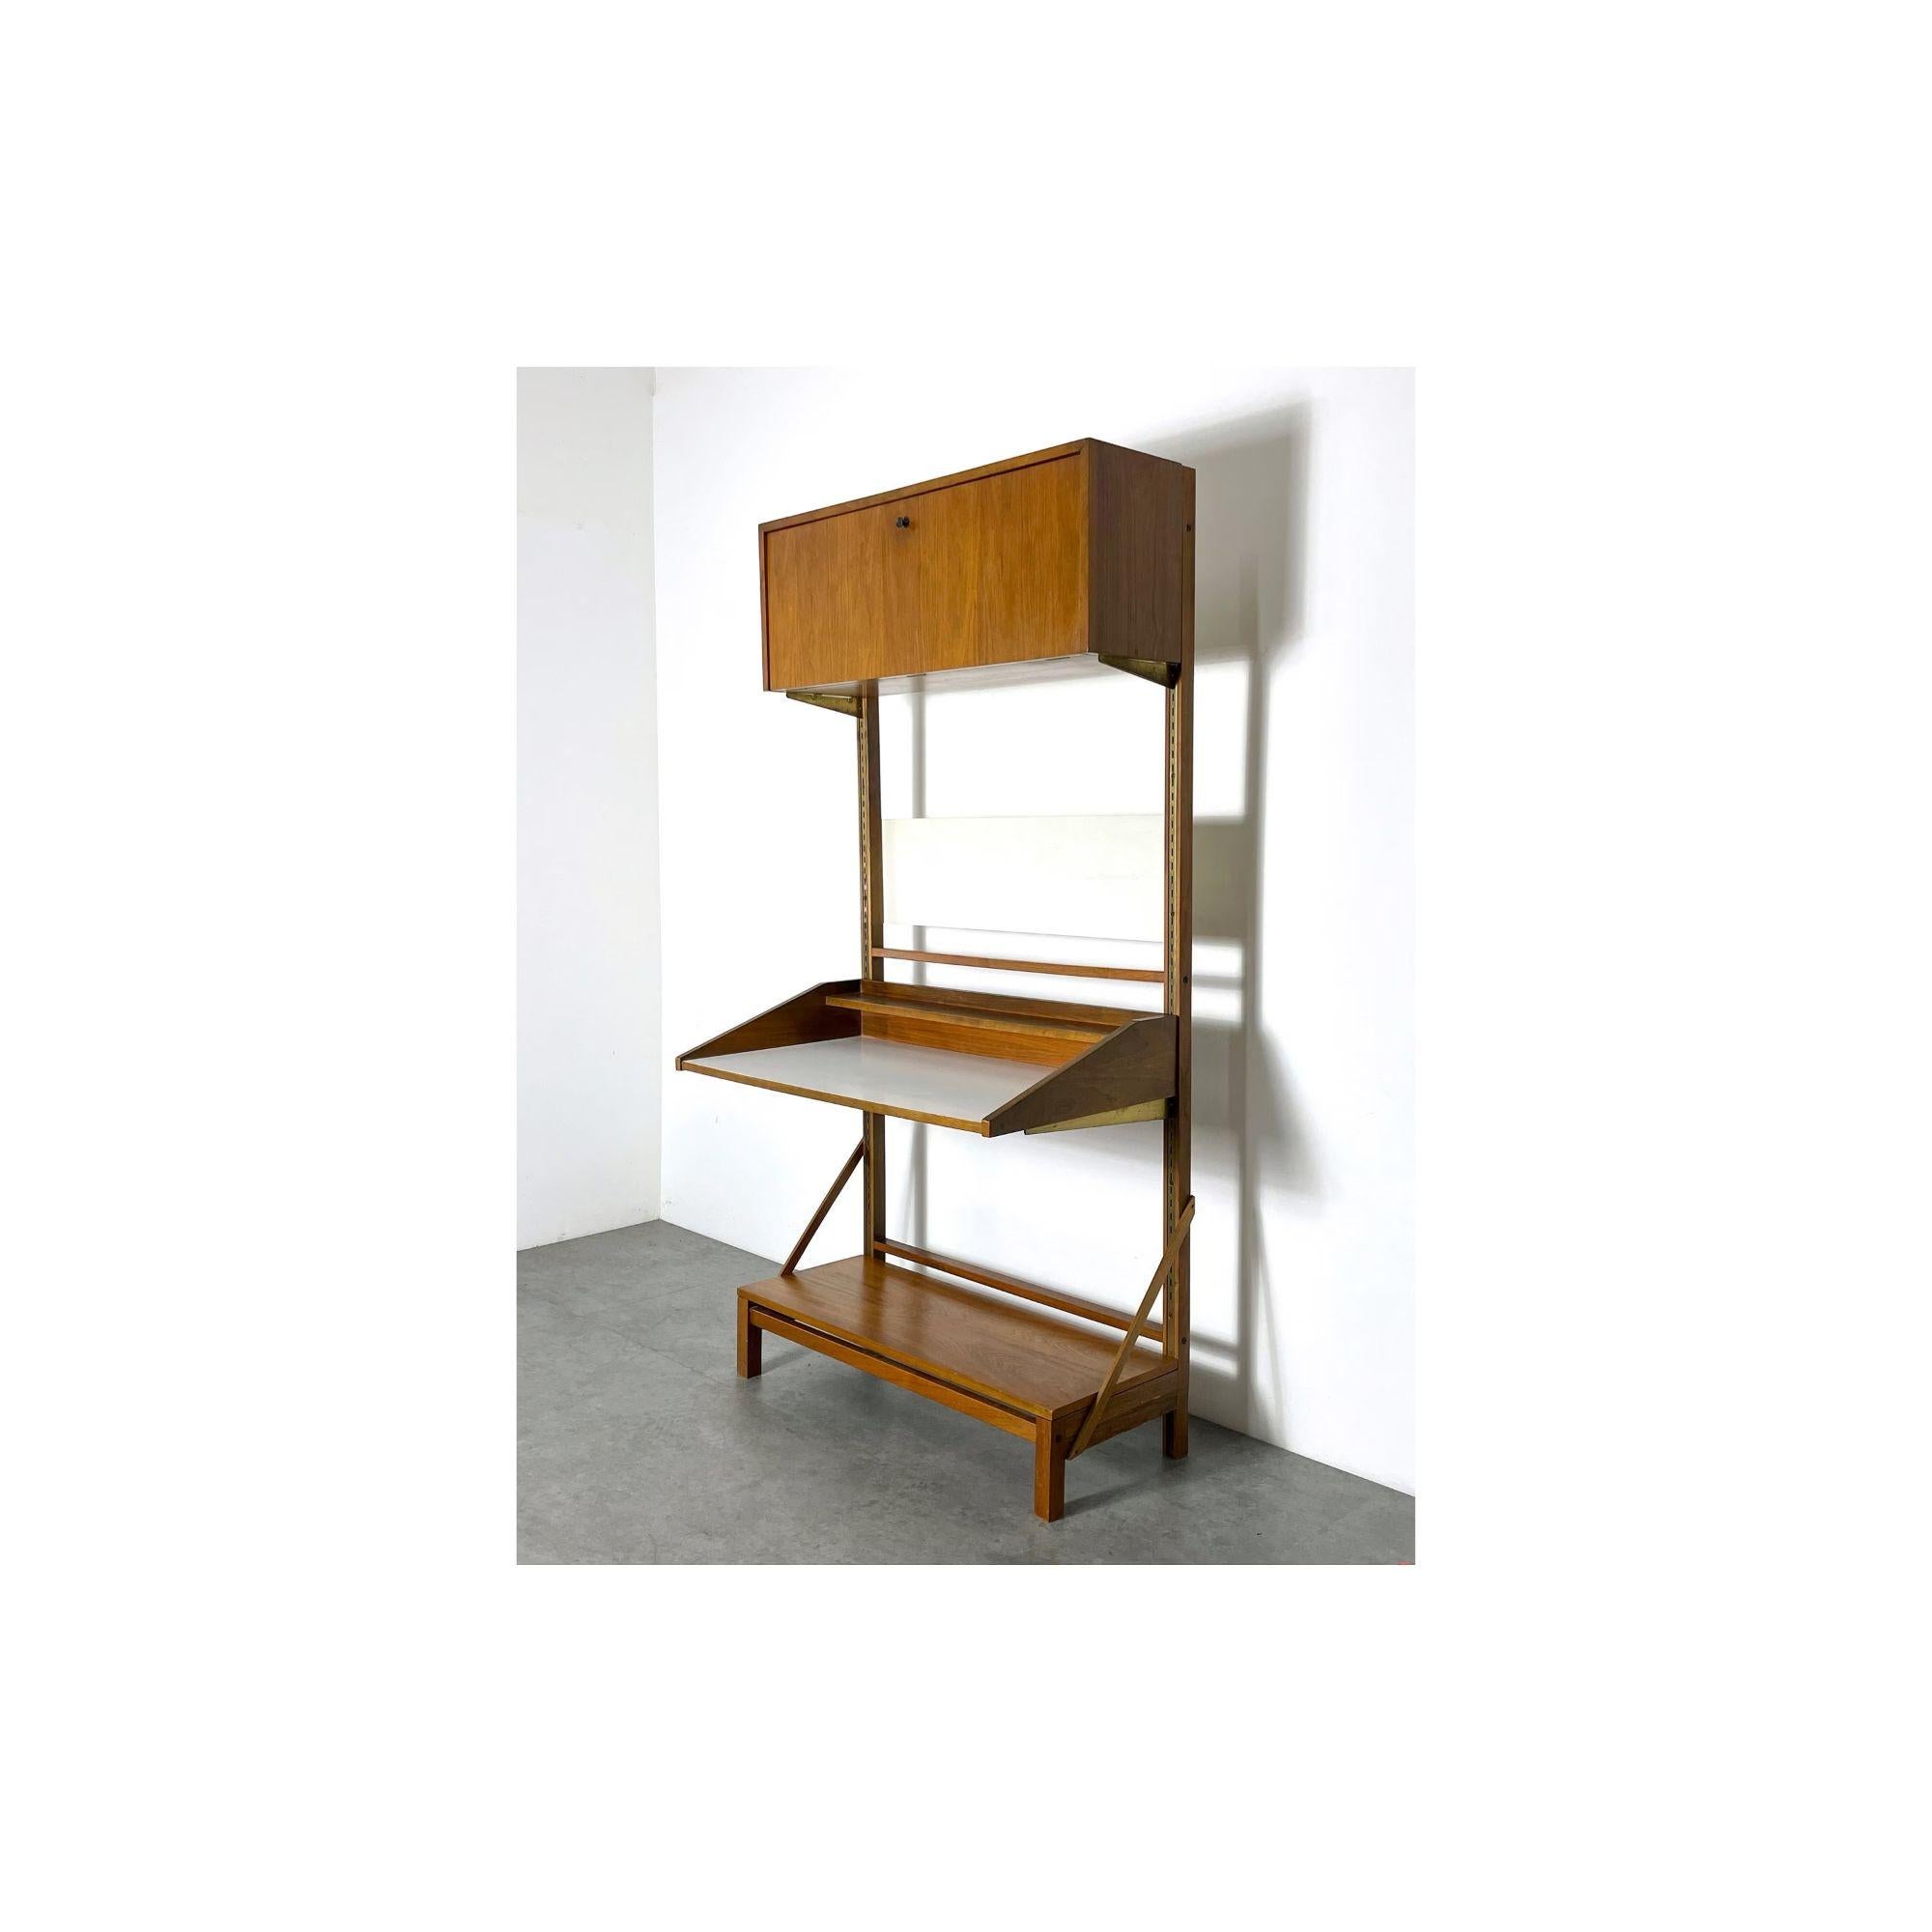 Vintage Mid Century Modern Freestanding Wall Unit Desk 

Great modernist secretary wall unit circa 1960s
Freestanding with adjustable upper drop front cabinet and floating desk
Walnut construction with white laminate surface and black hourglass